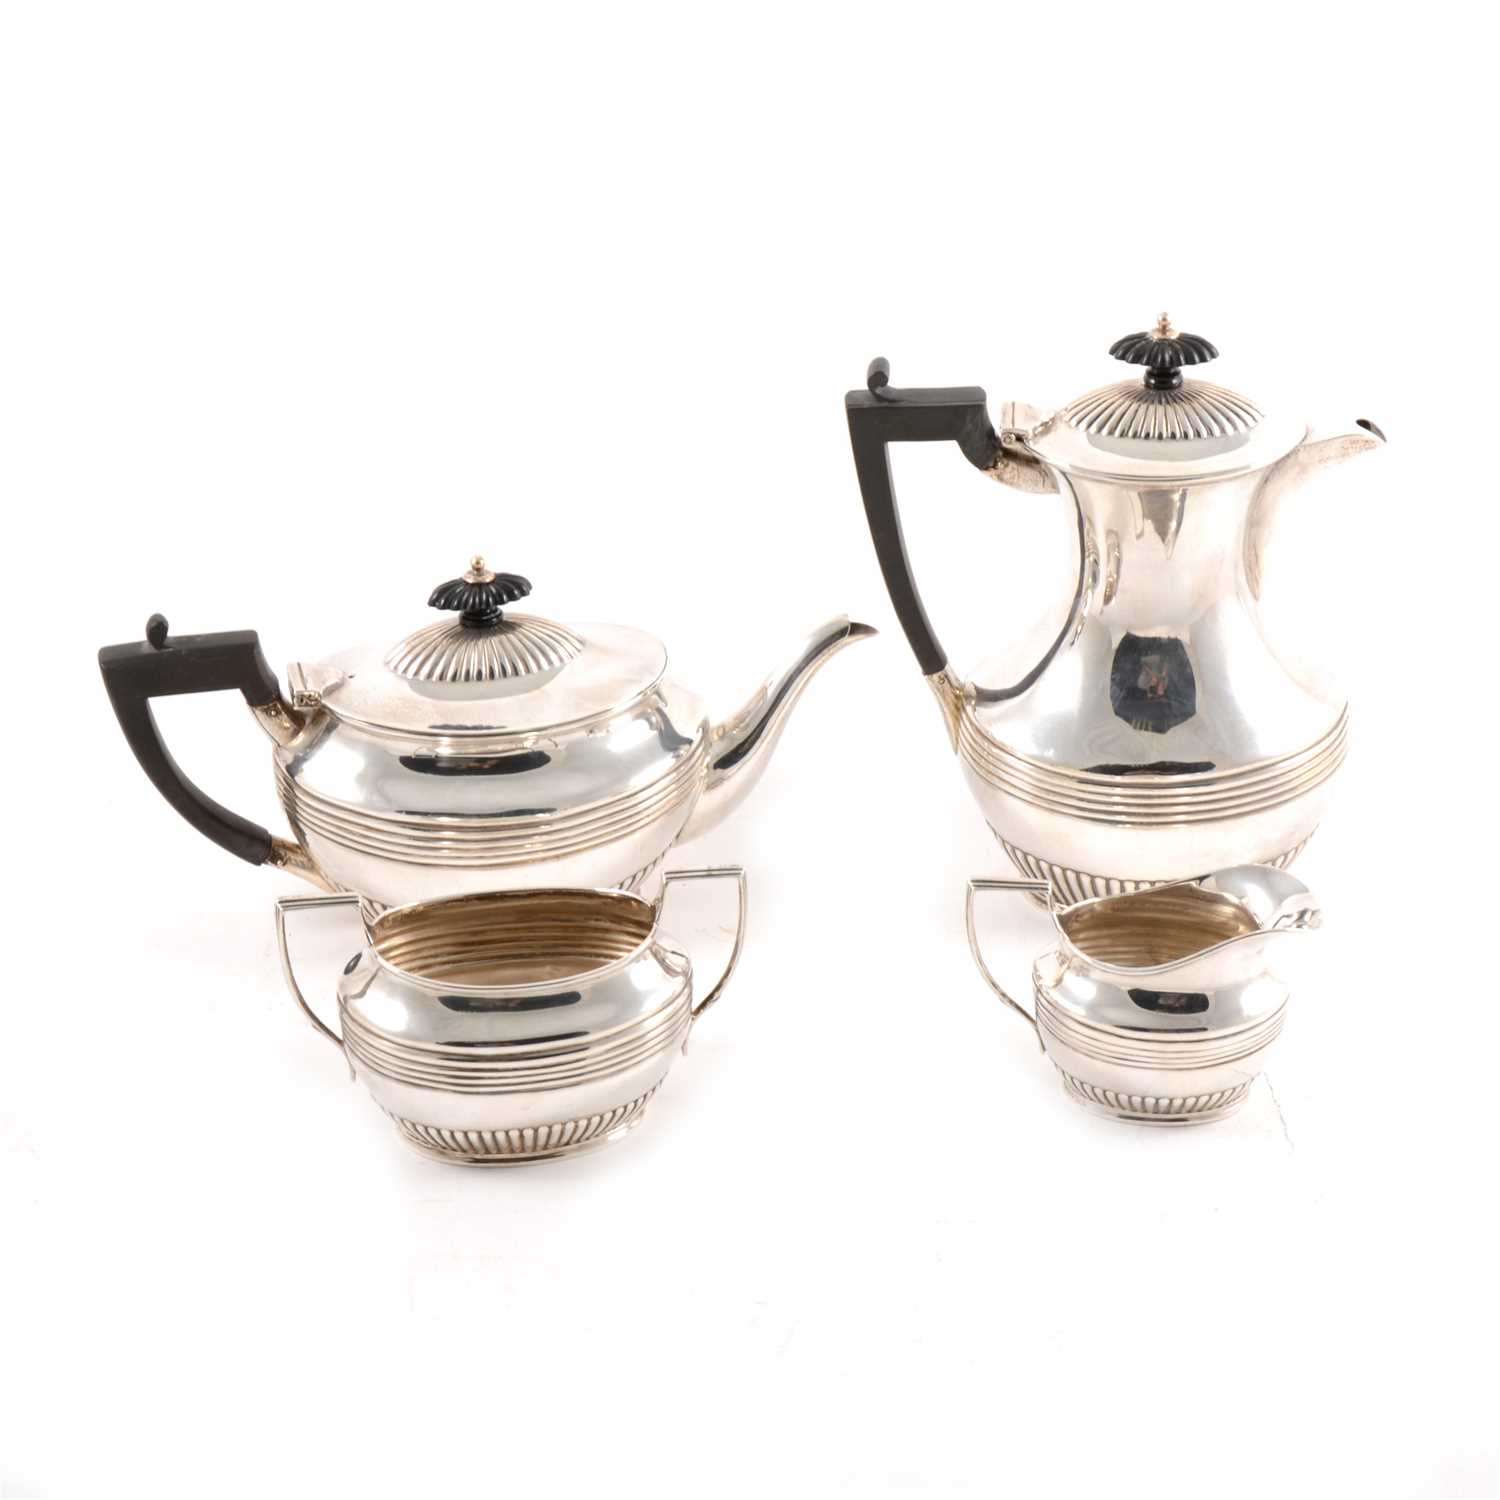 Lot 164 - A four piece Scottish silver tea set by Hamilton and Inches